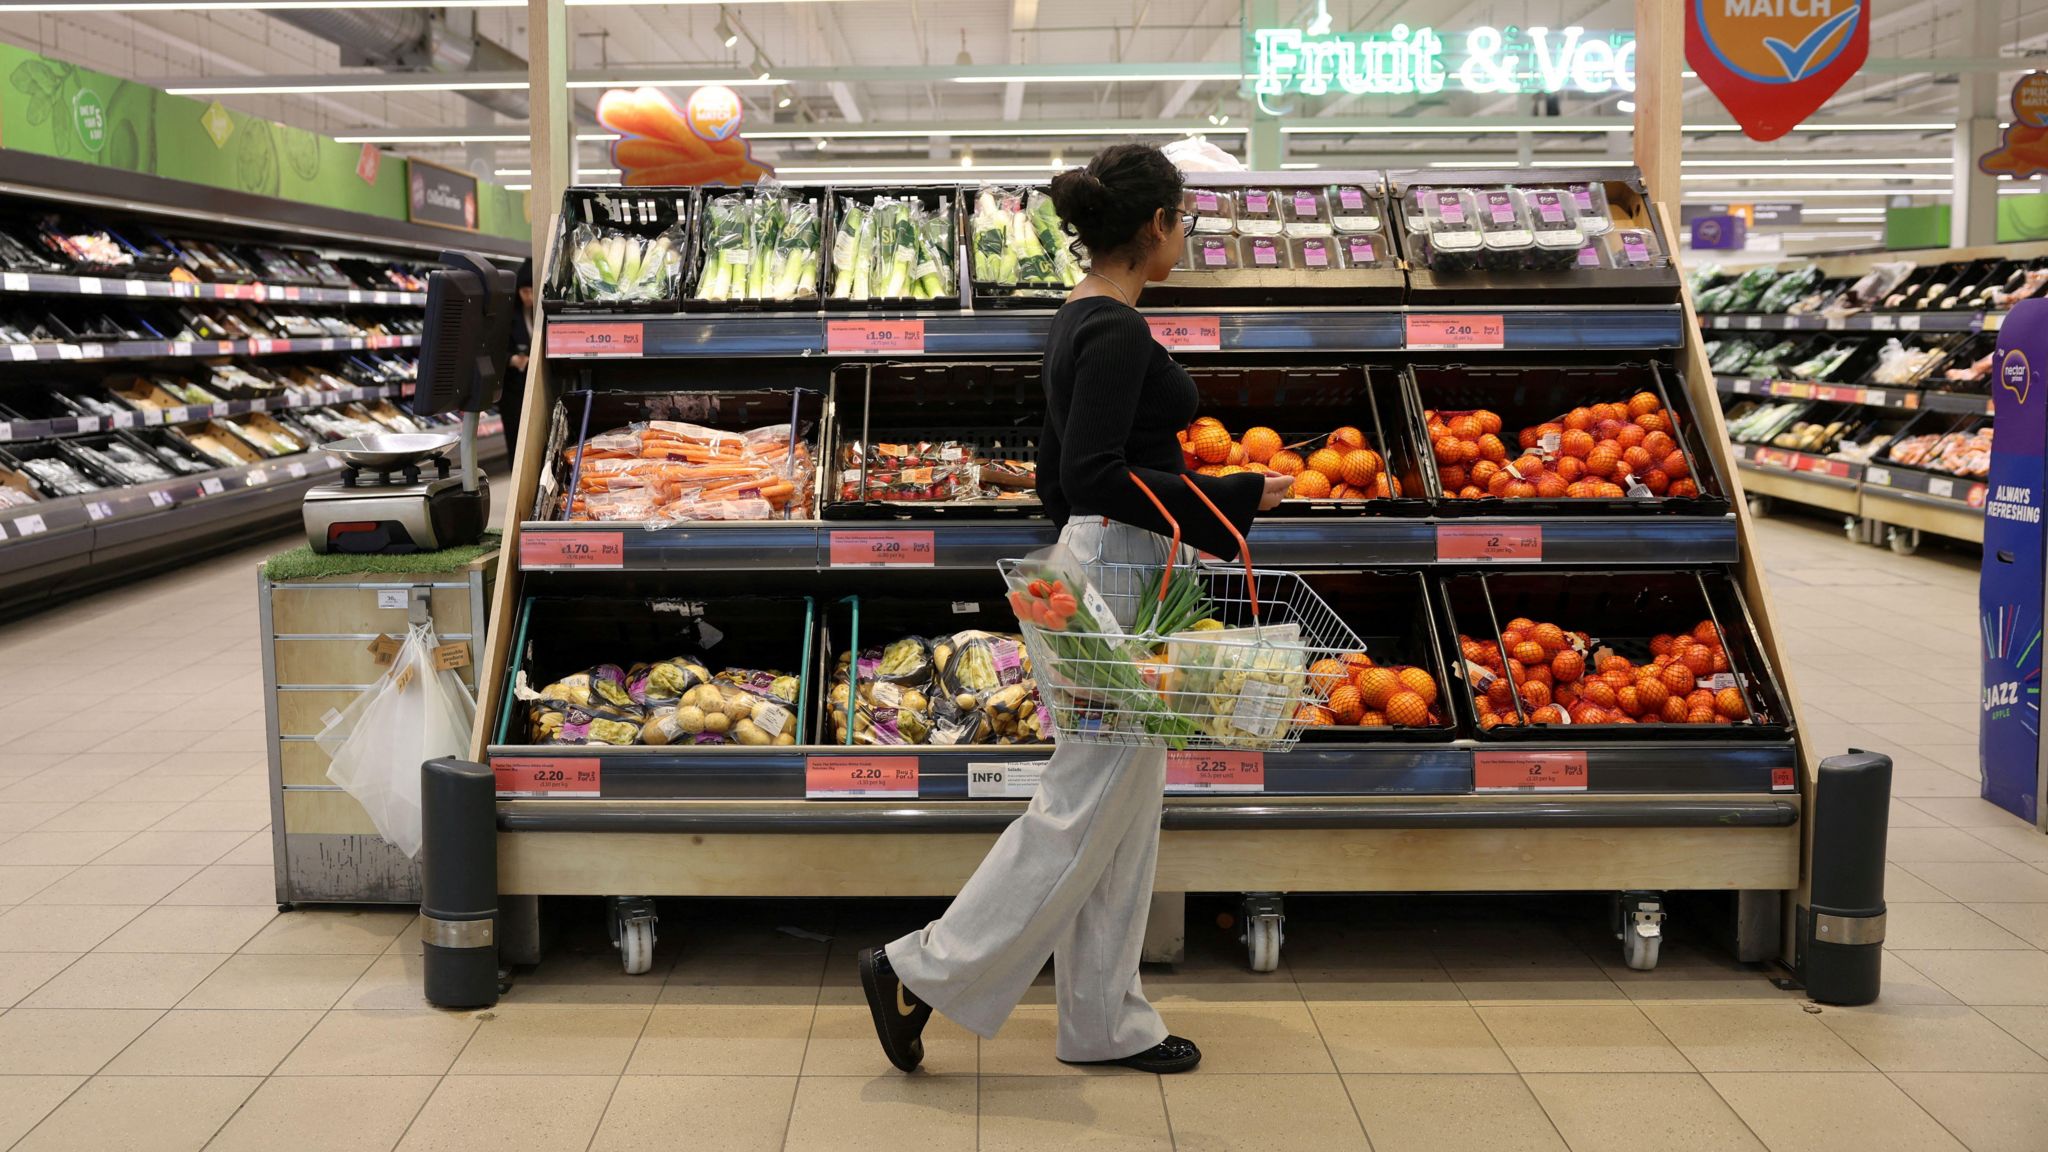 A customer shops in the fruit aisle inside a supermarket